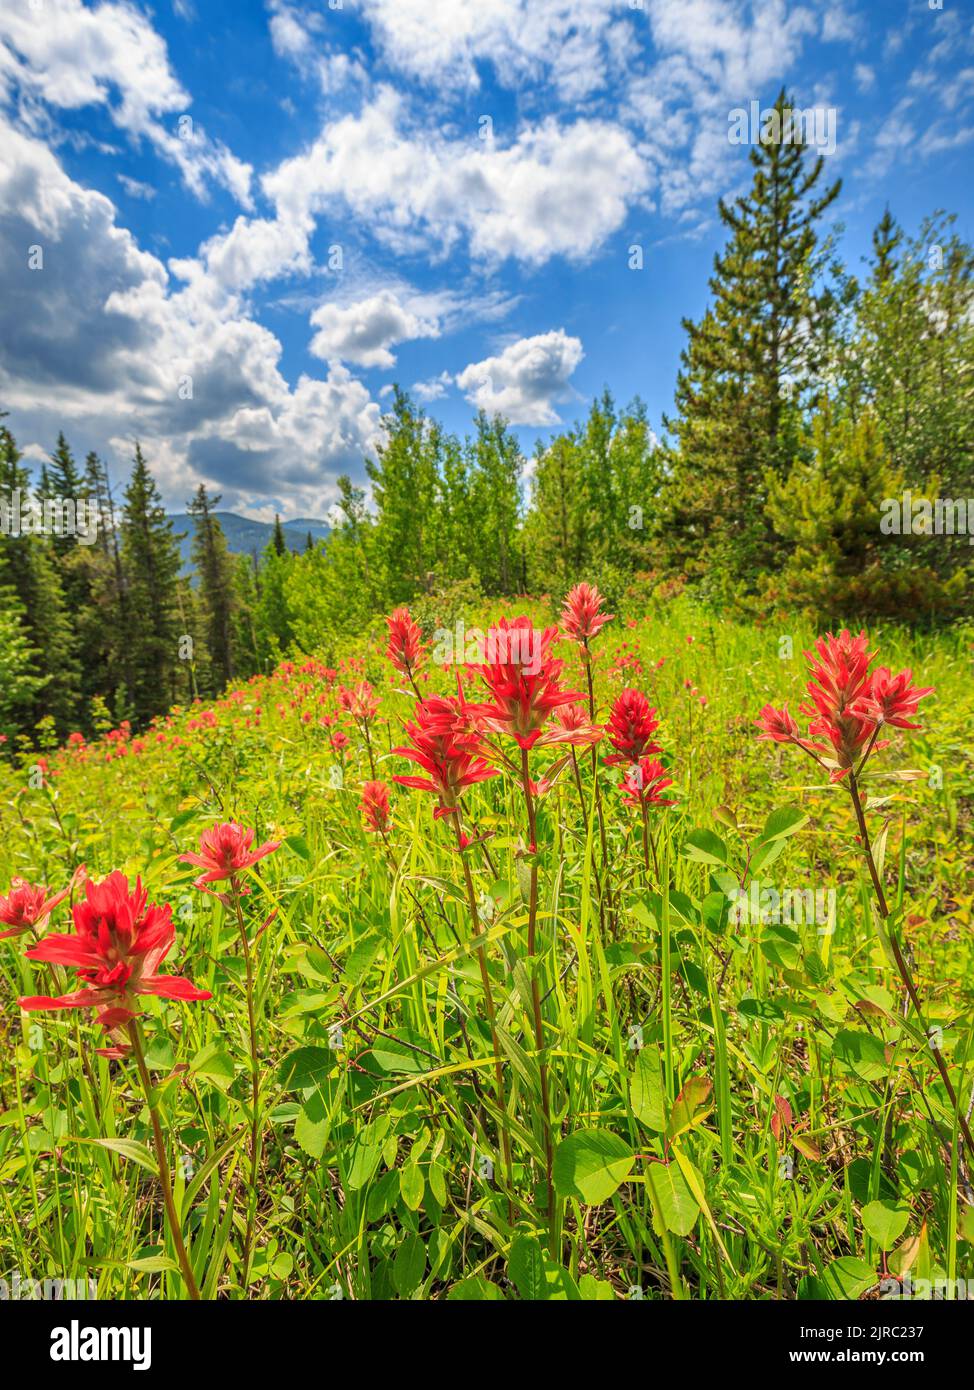 Vivid red Indian Paintbrush (Castilleja) wildflowers in a clearing on a forested hillside Stock Photo